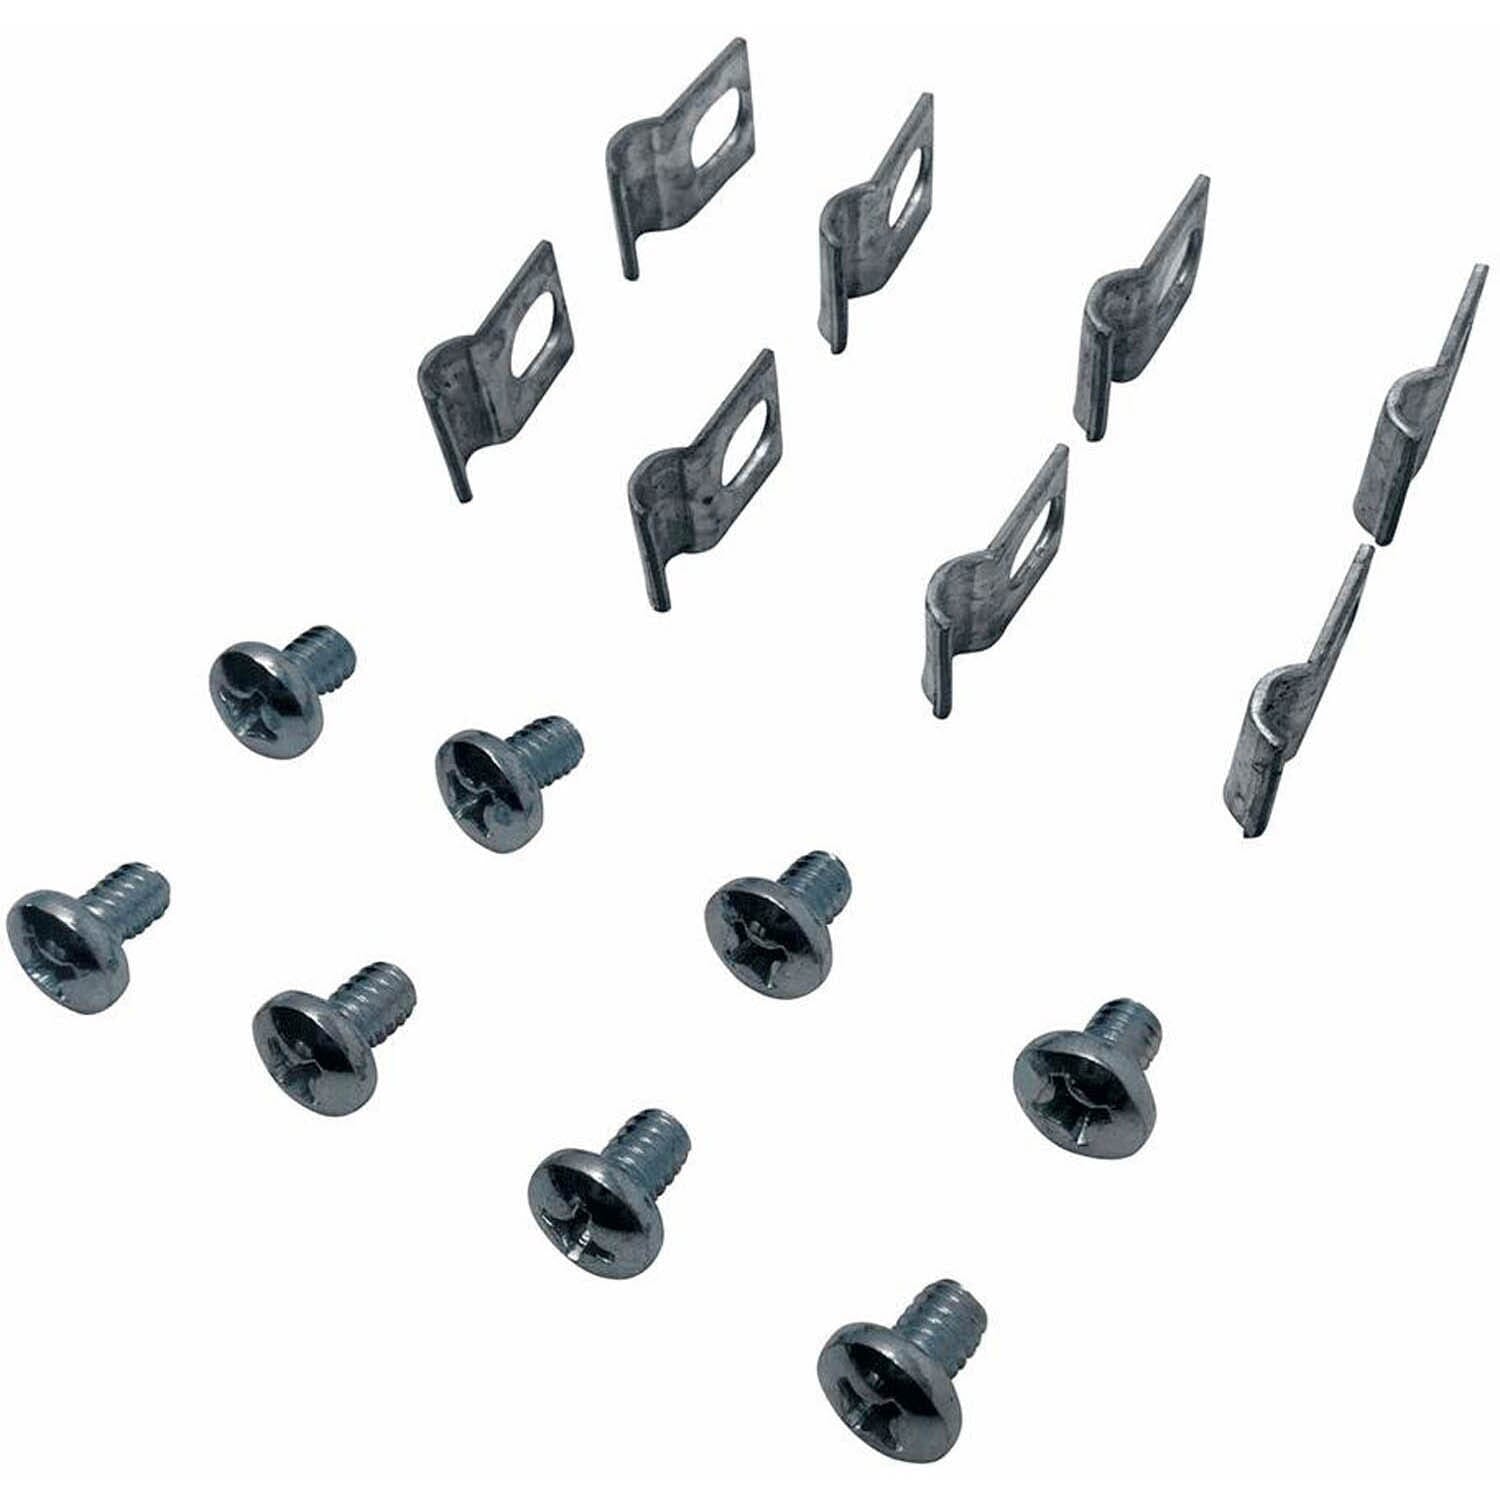 Replacement Retainer clip / screws 8 per pack fits Contemp/traditional  Door, GR47/48/57/58/77/78 FS BVENT, C33/1/2/3 FS BV, Z2510/2500/RO  Warmhearth Plus R90 PR67 H300846-920